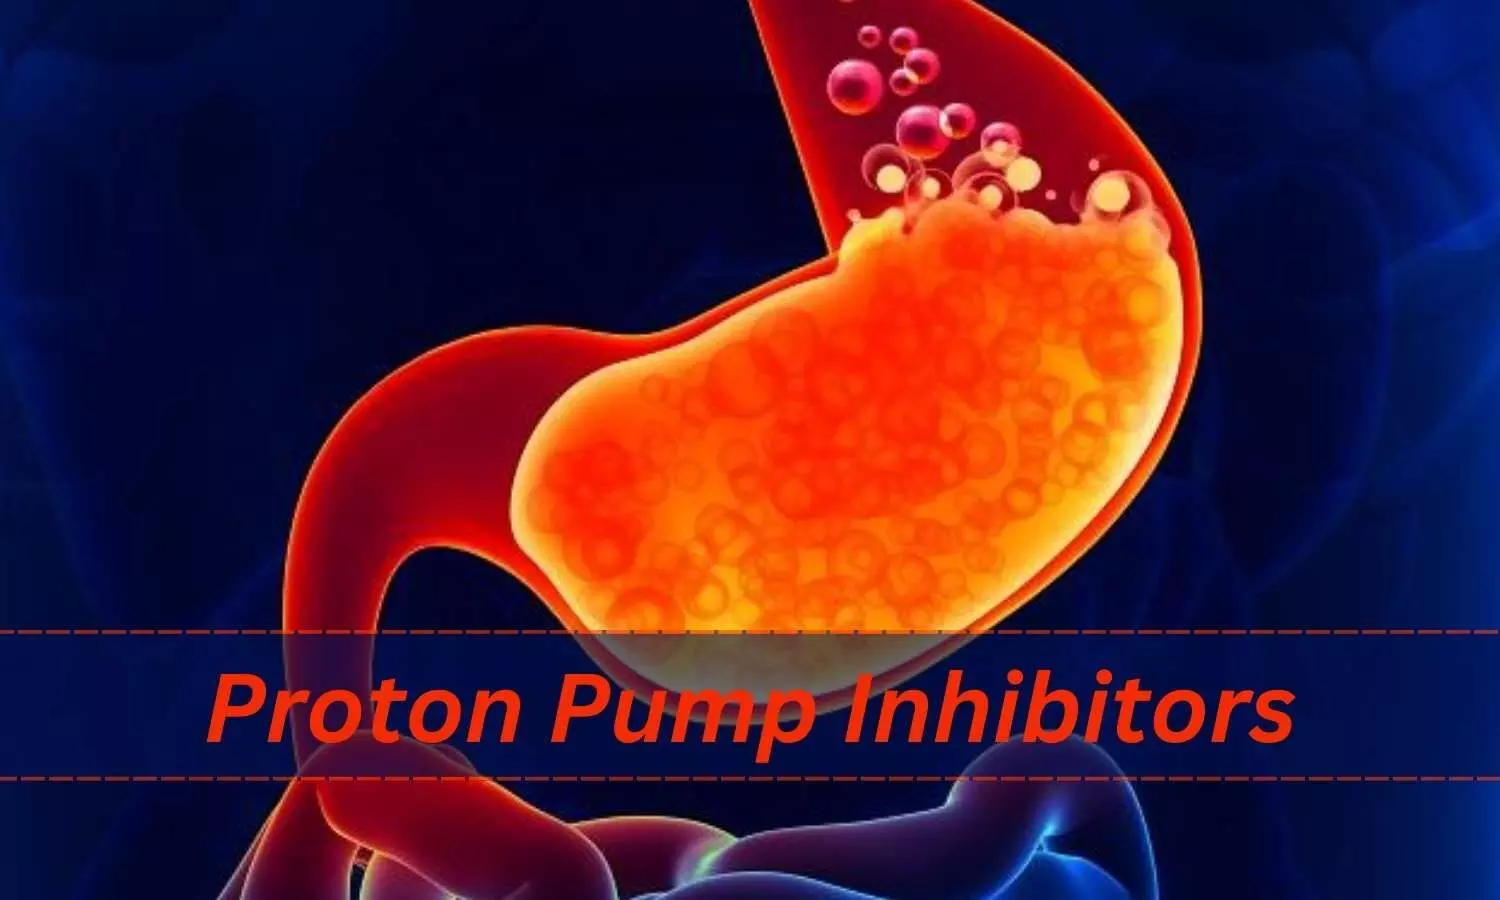 Proton pump inhibitor use tied to CVD and mortality in type 2 diabetes patients